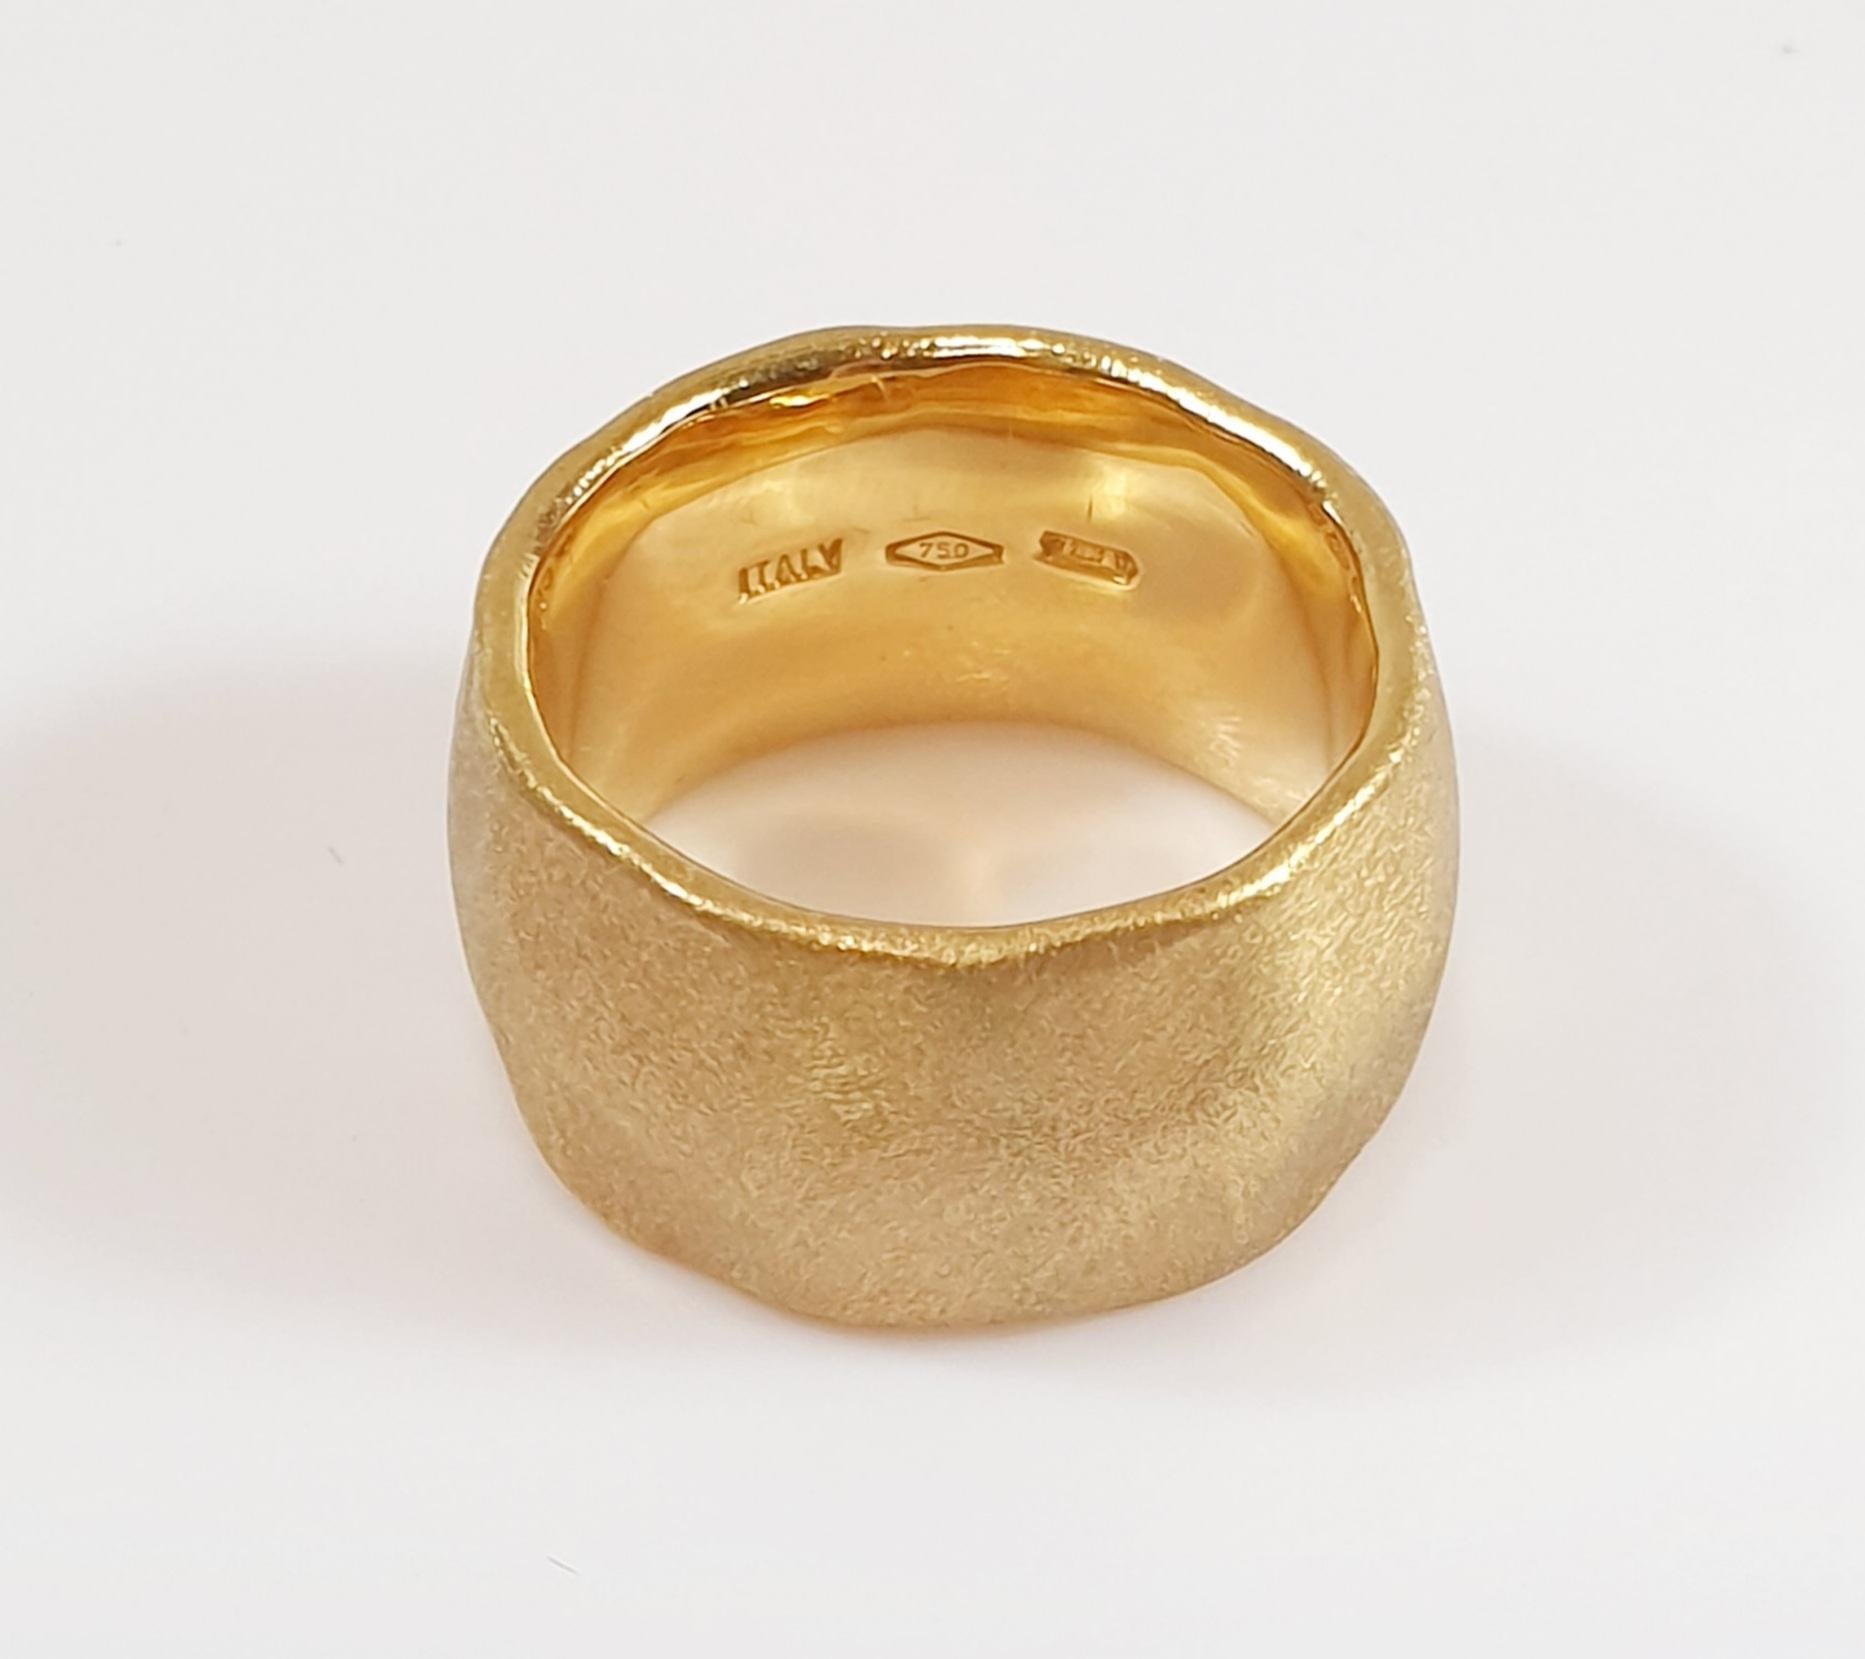 Calgaro 18 Karat Satined Yellow Gold Ring with Martelé Texture For Sale ...